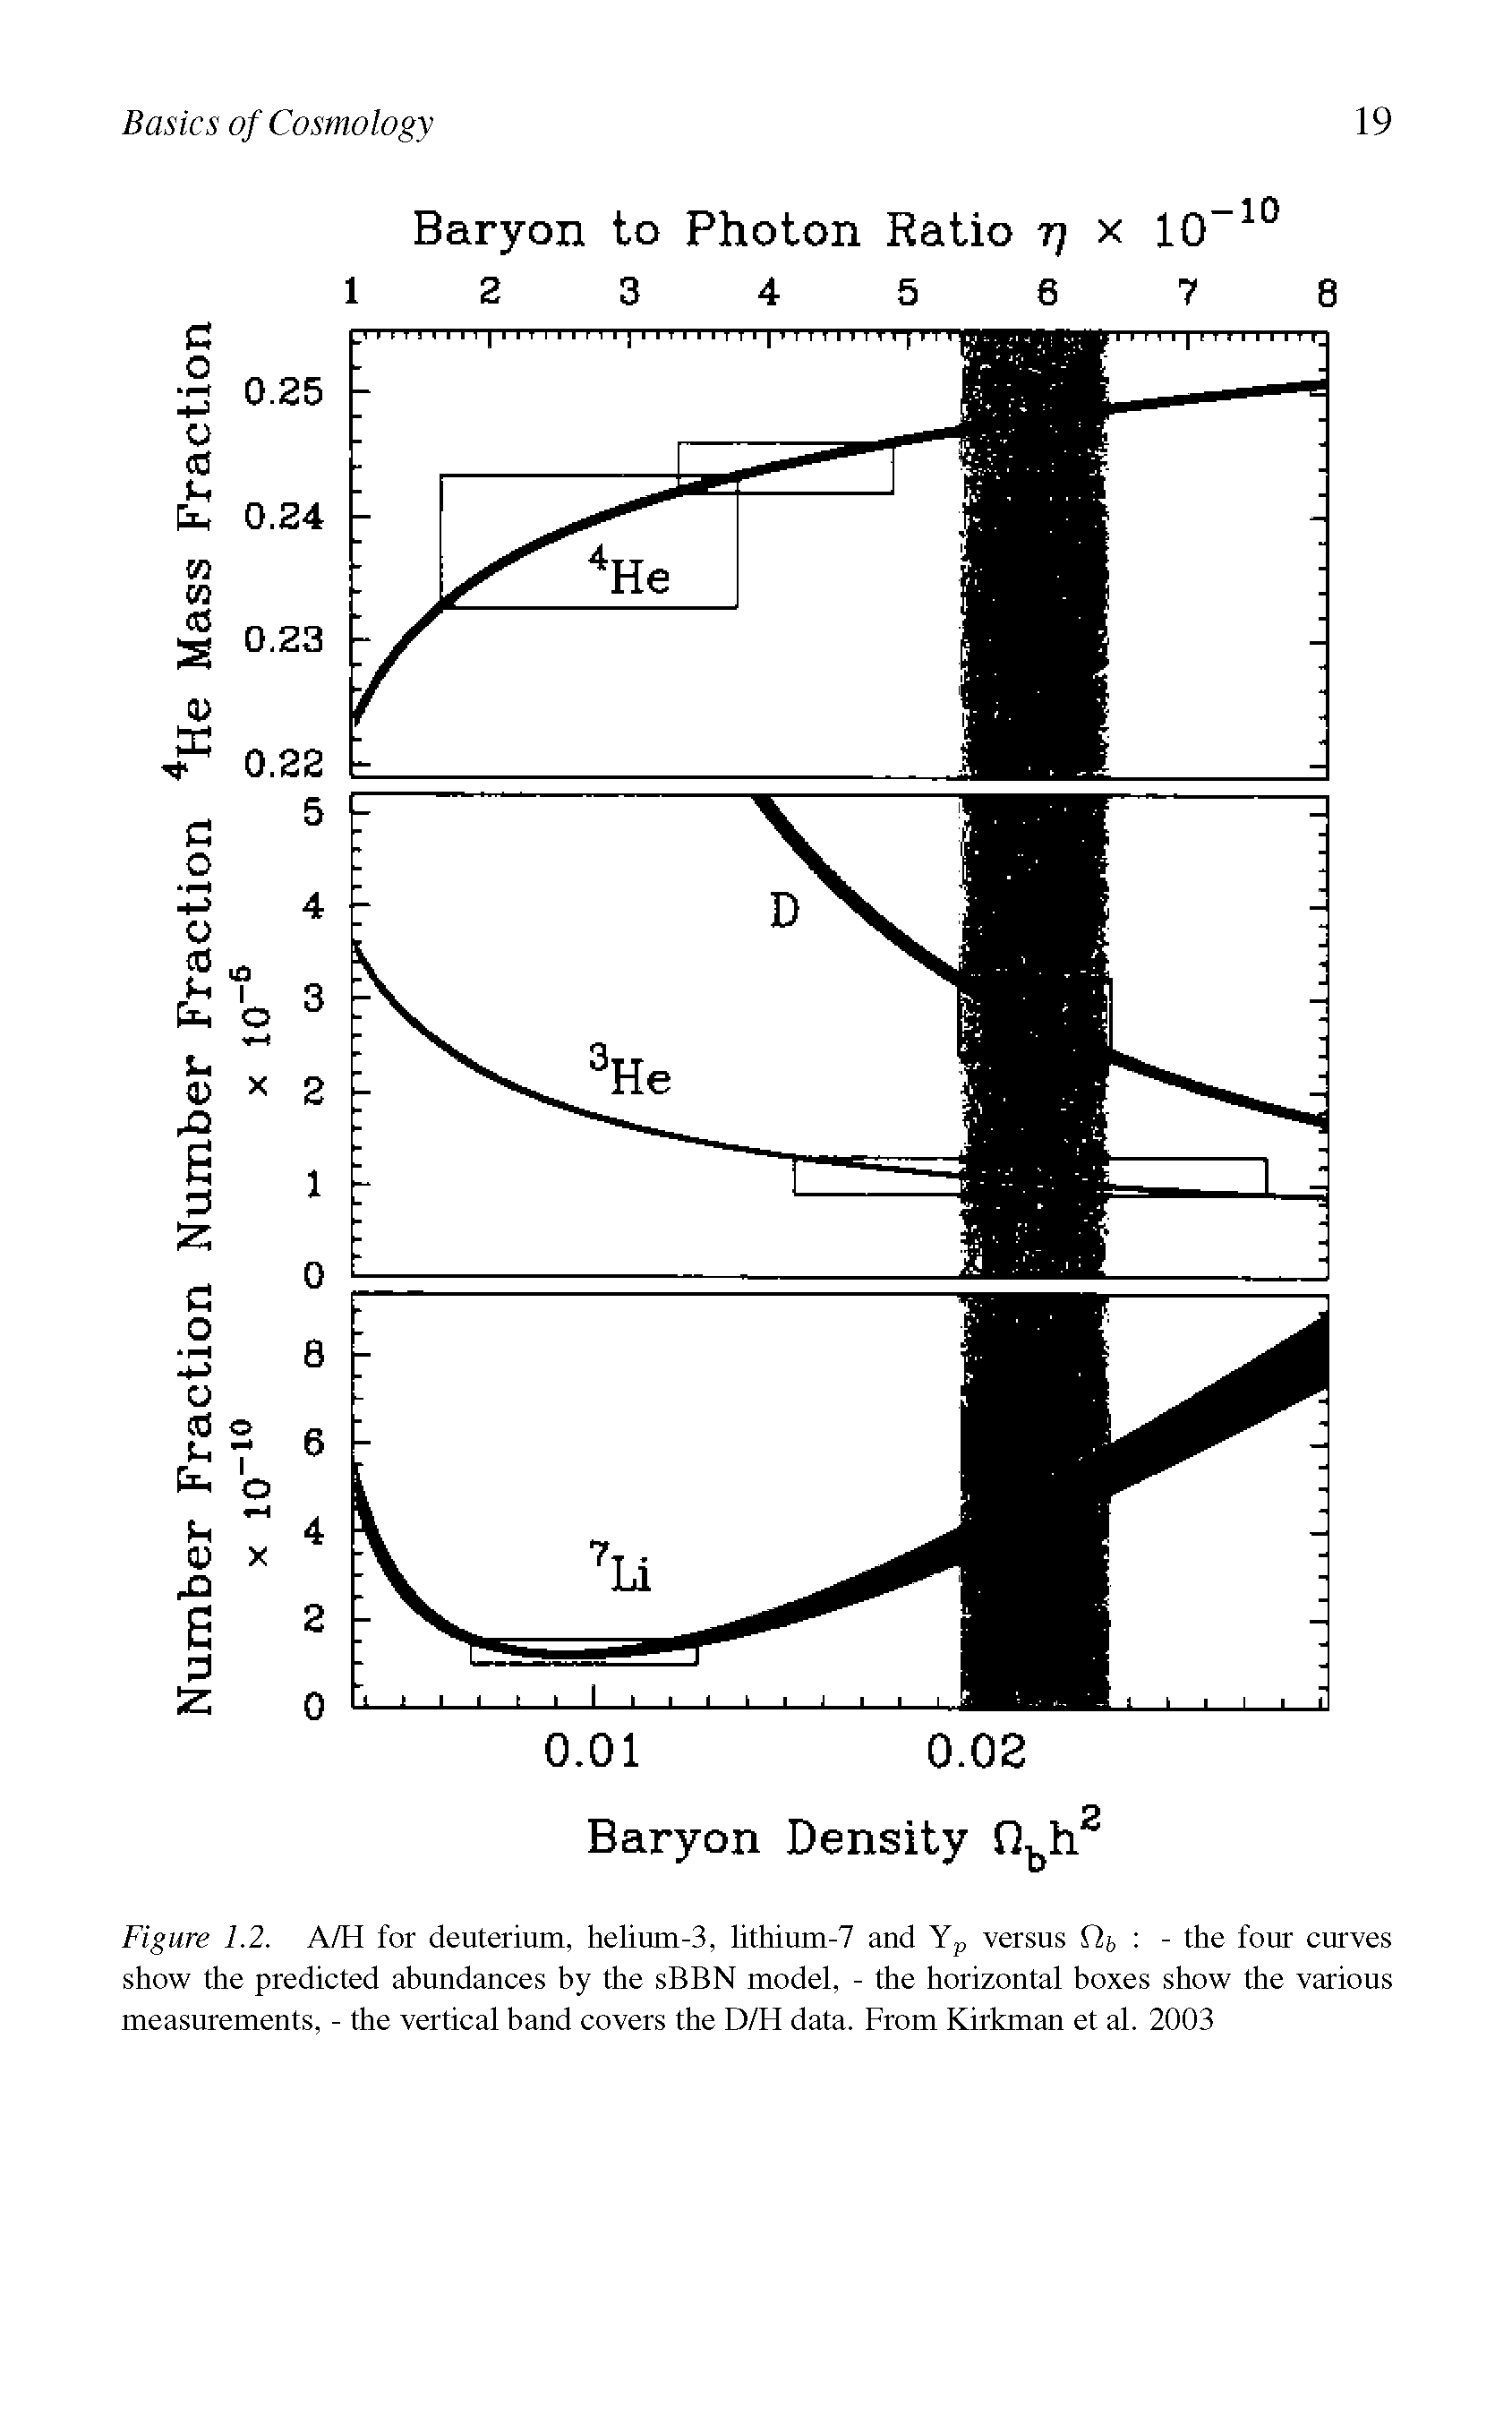 Figure 1.2. A/H for deuterium, helium-3, lithium-7 and Yp versus fif, - the four curves show the predicted abundances by the sBBN model, - the horizontal boxes show the various measurements, - the vertical band covers the D/H data. From Kirkman et al. 2003...